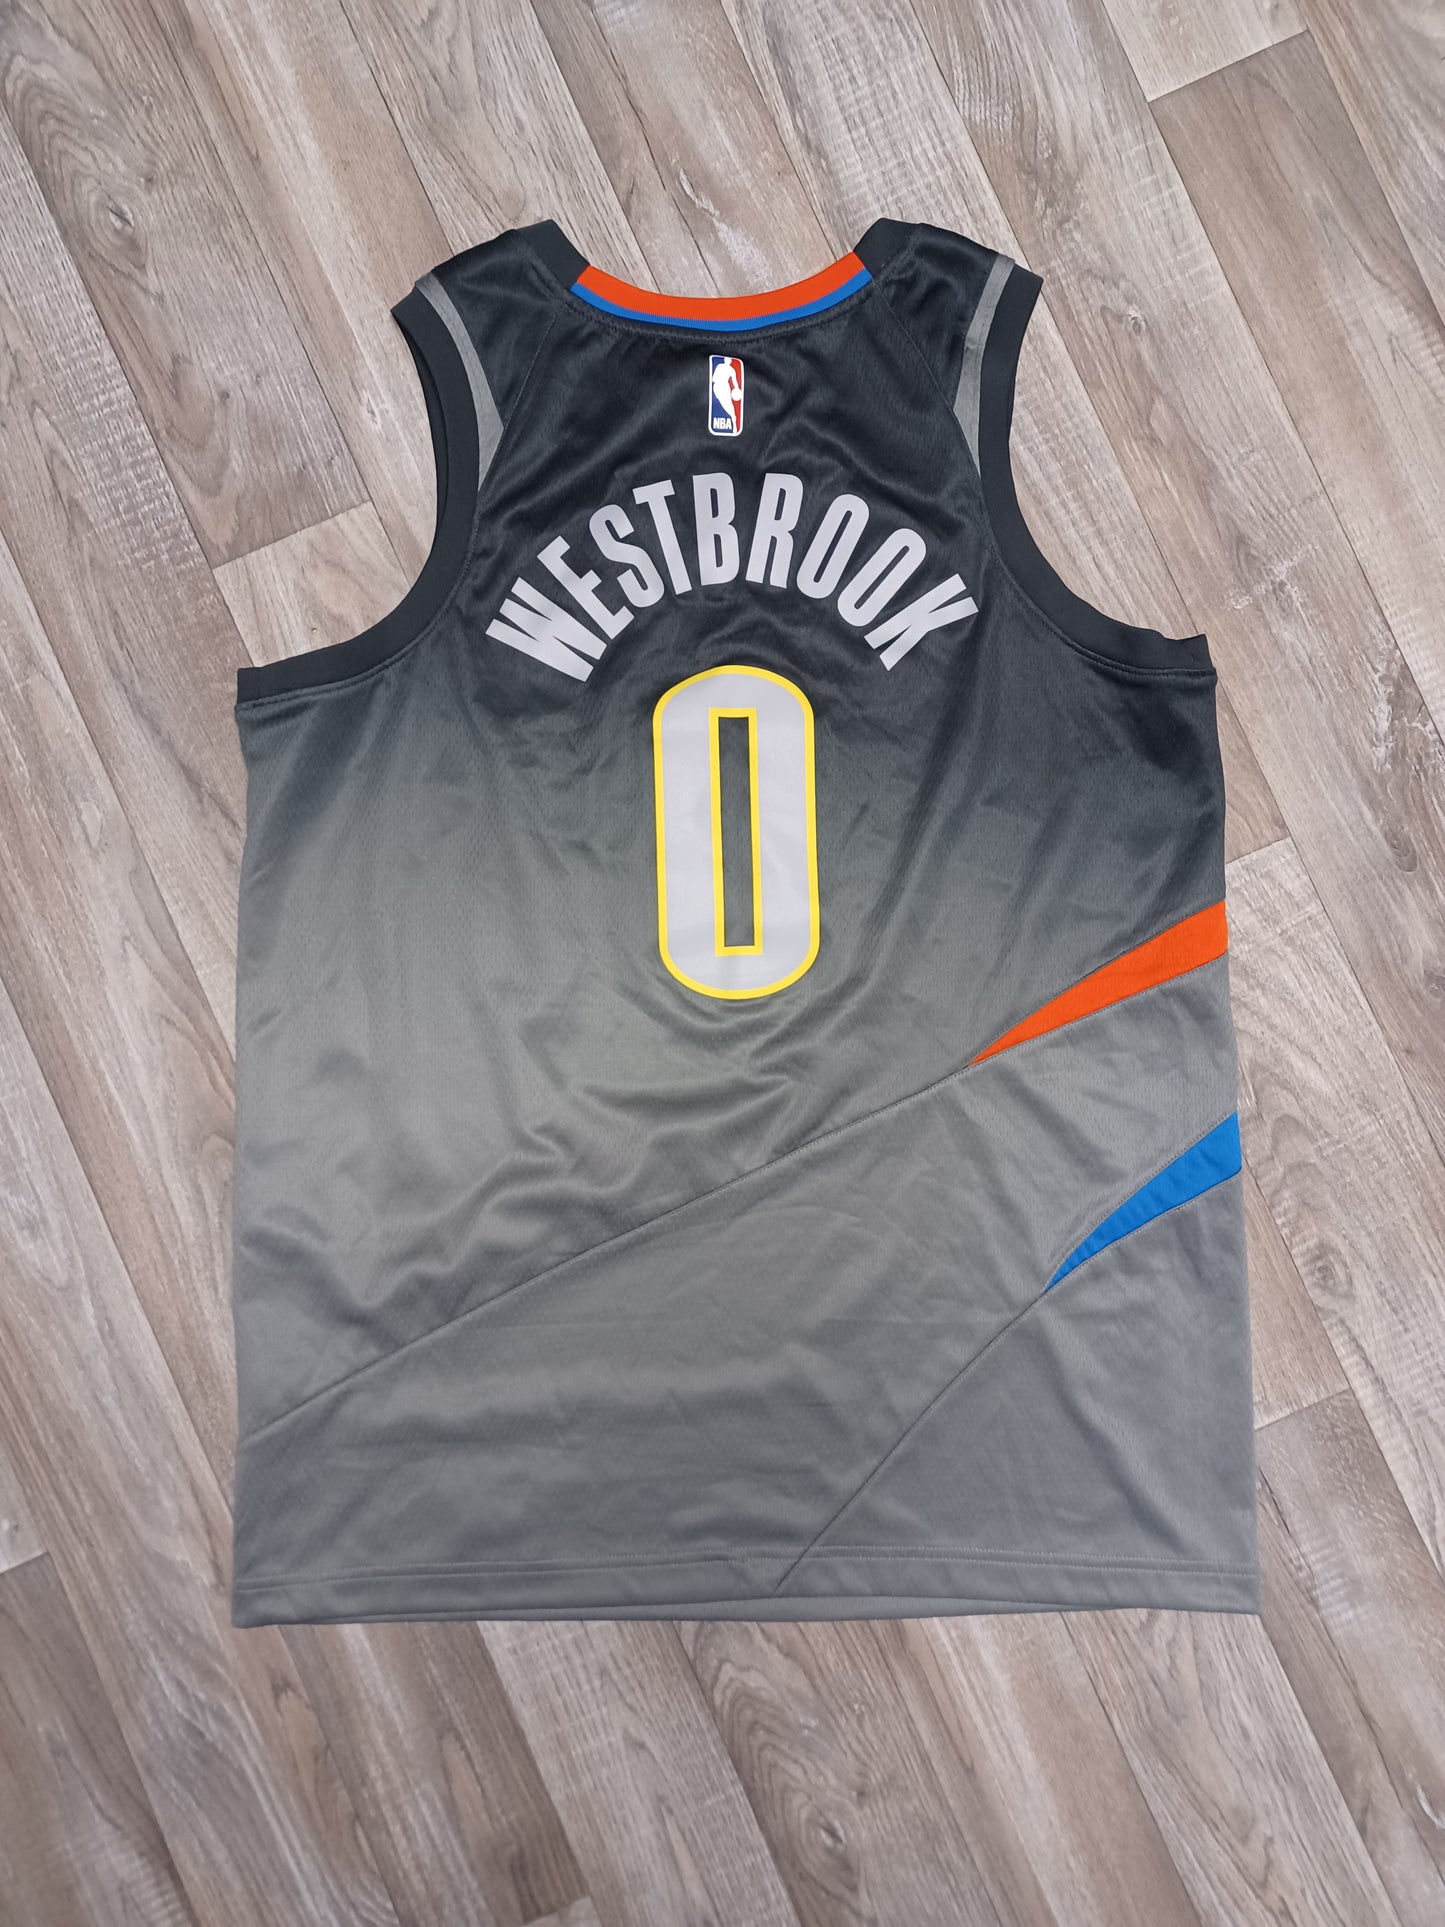 Russell Westbrook Oklahoma City Thunder Jersey Size Large